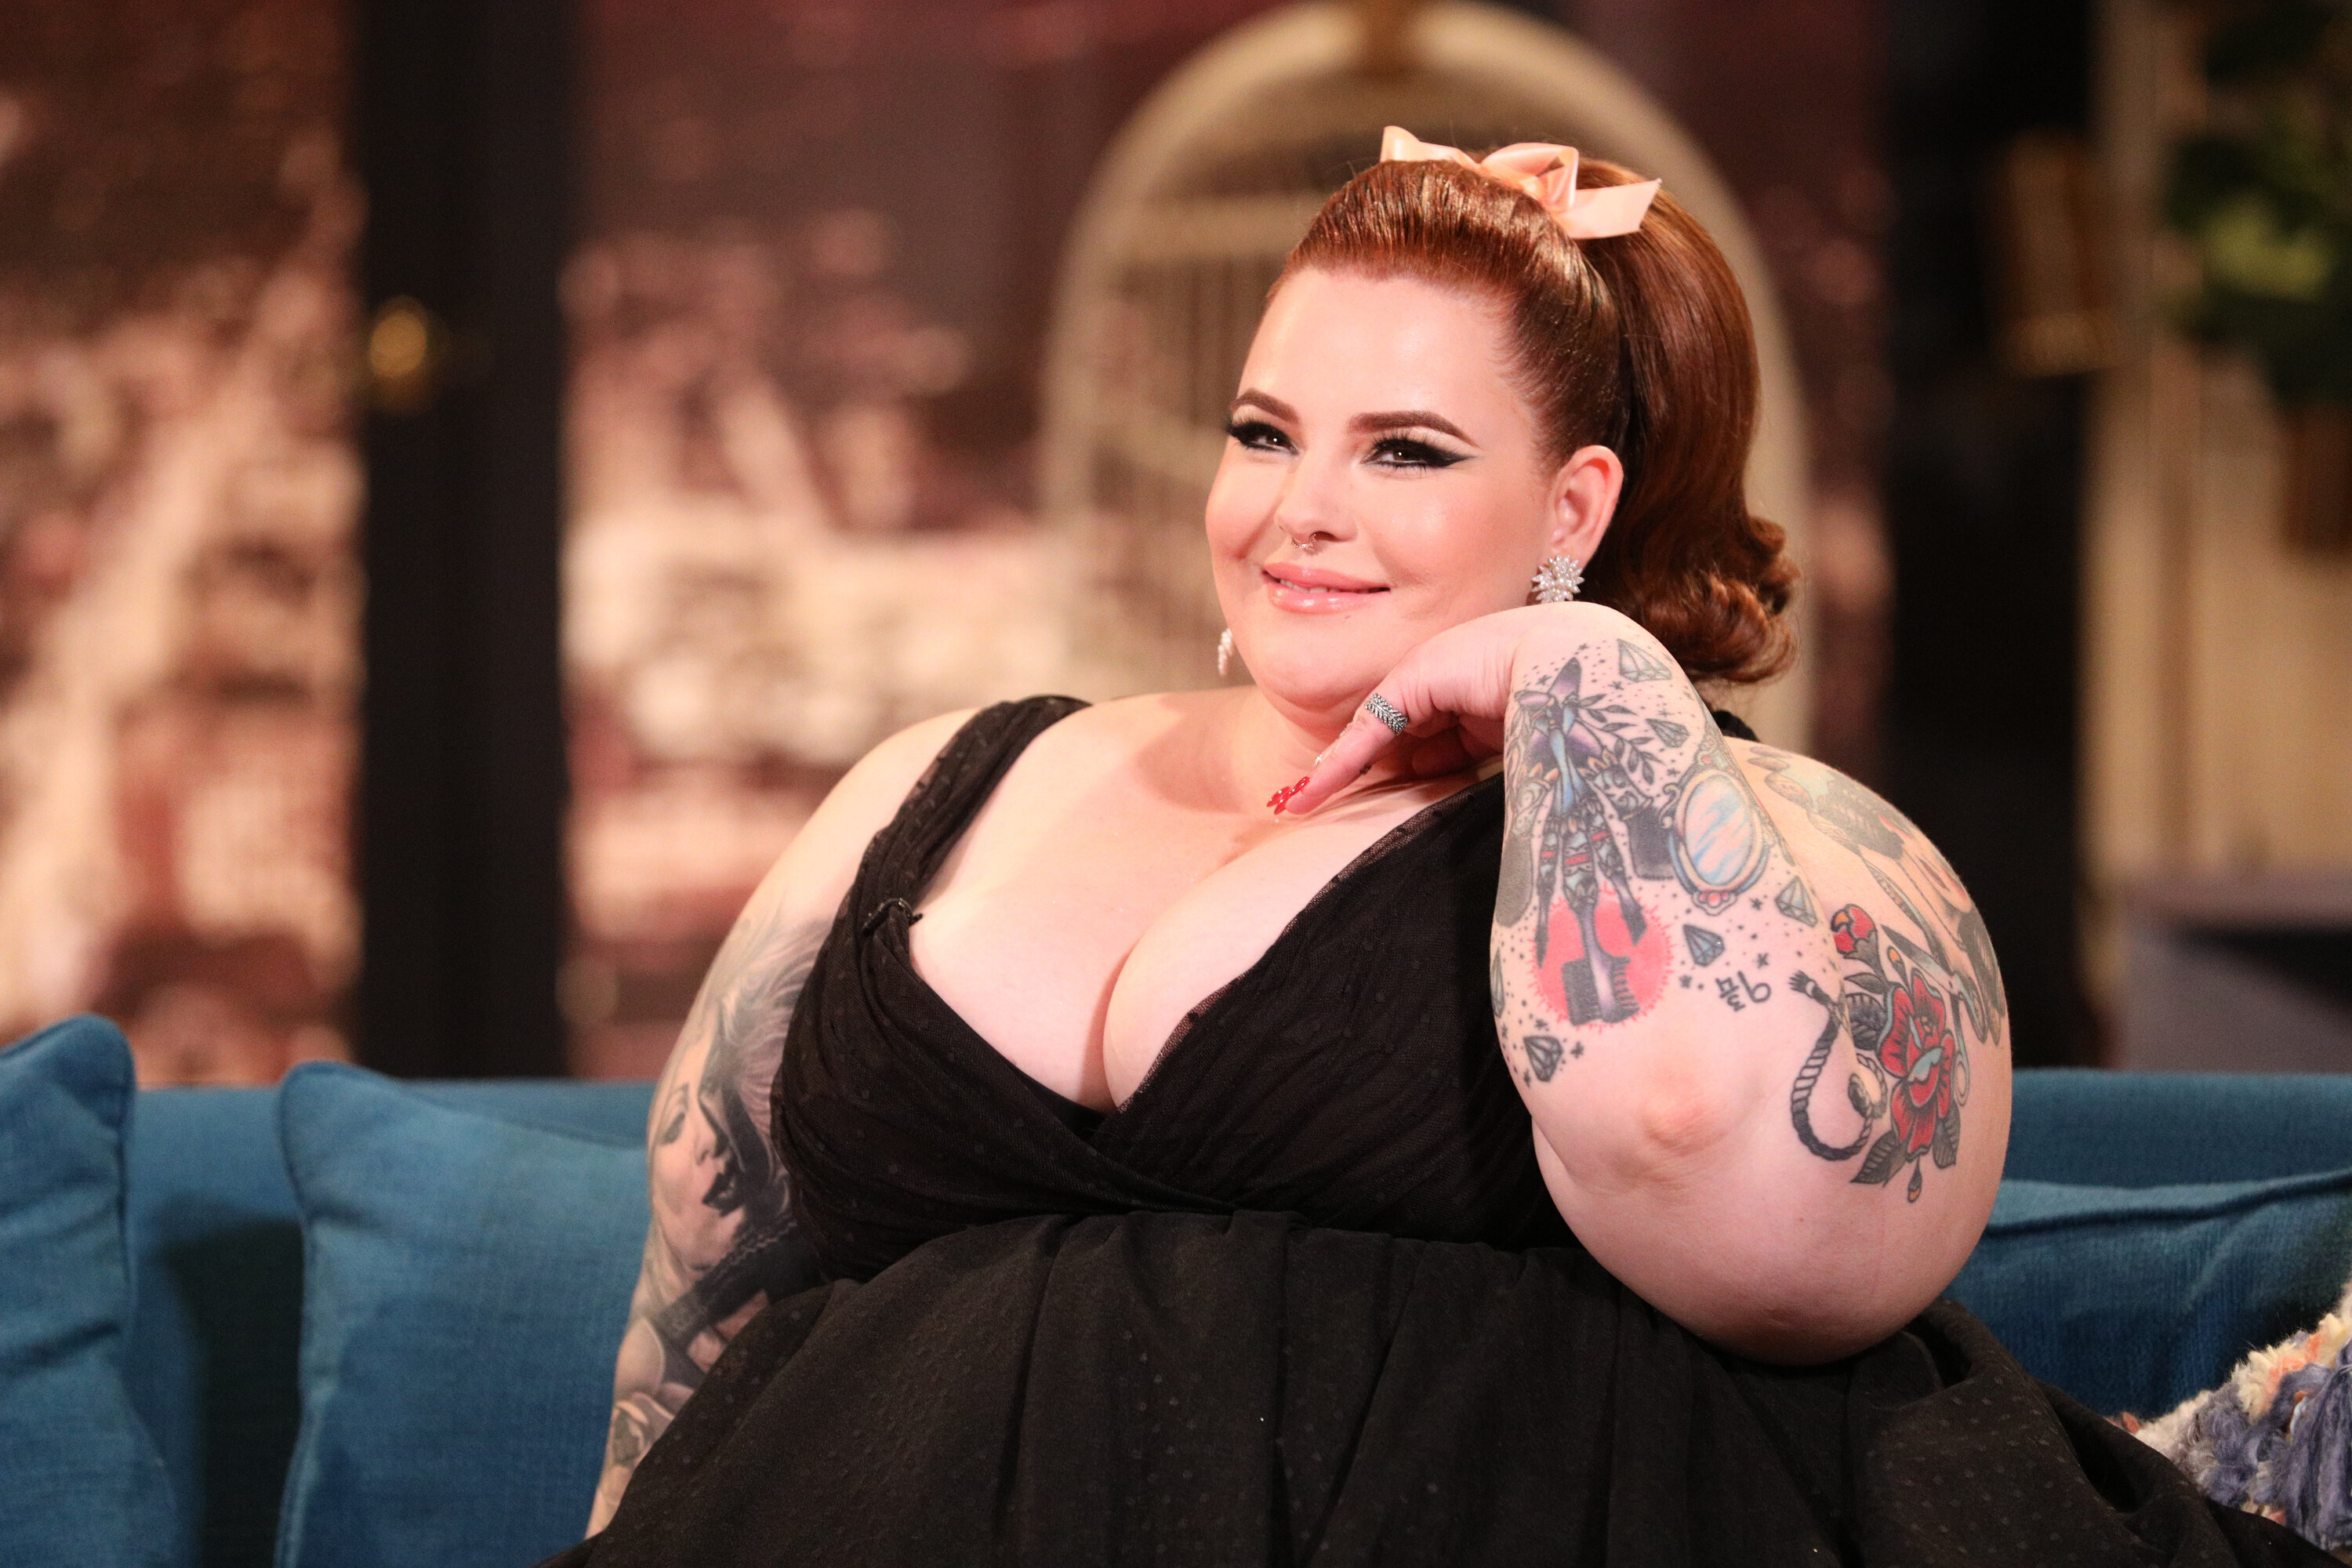 Like Tess Holliday, Im Fat And I Just Want To Live My Damn Life HuffPost HuffPost Personal